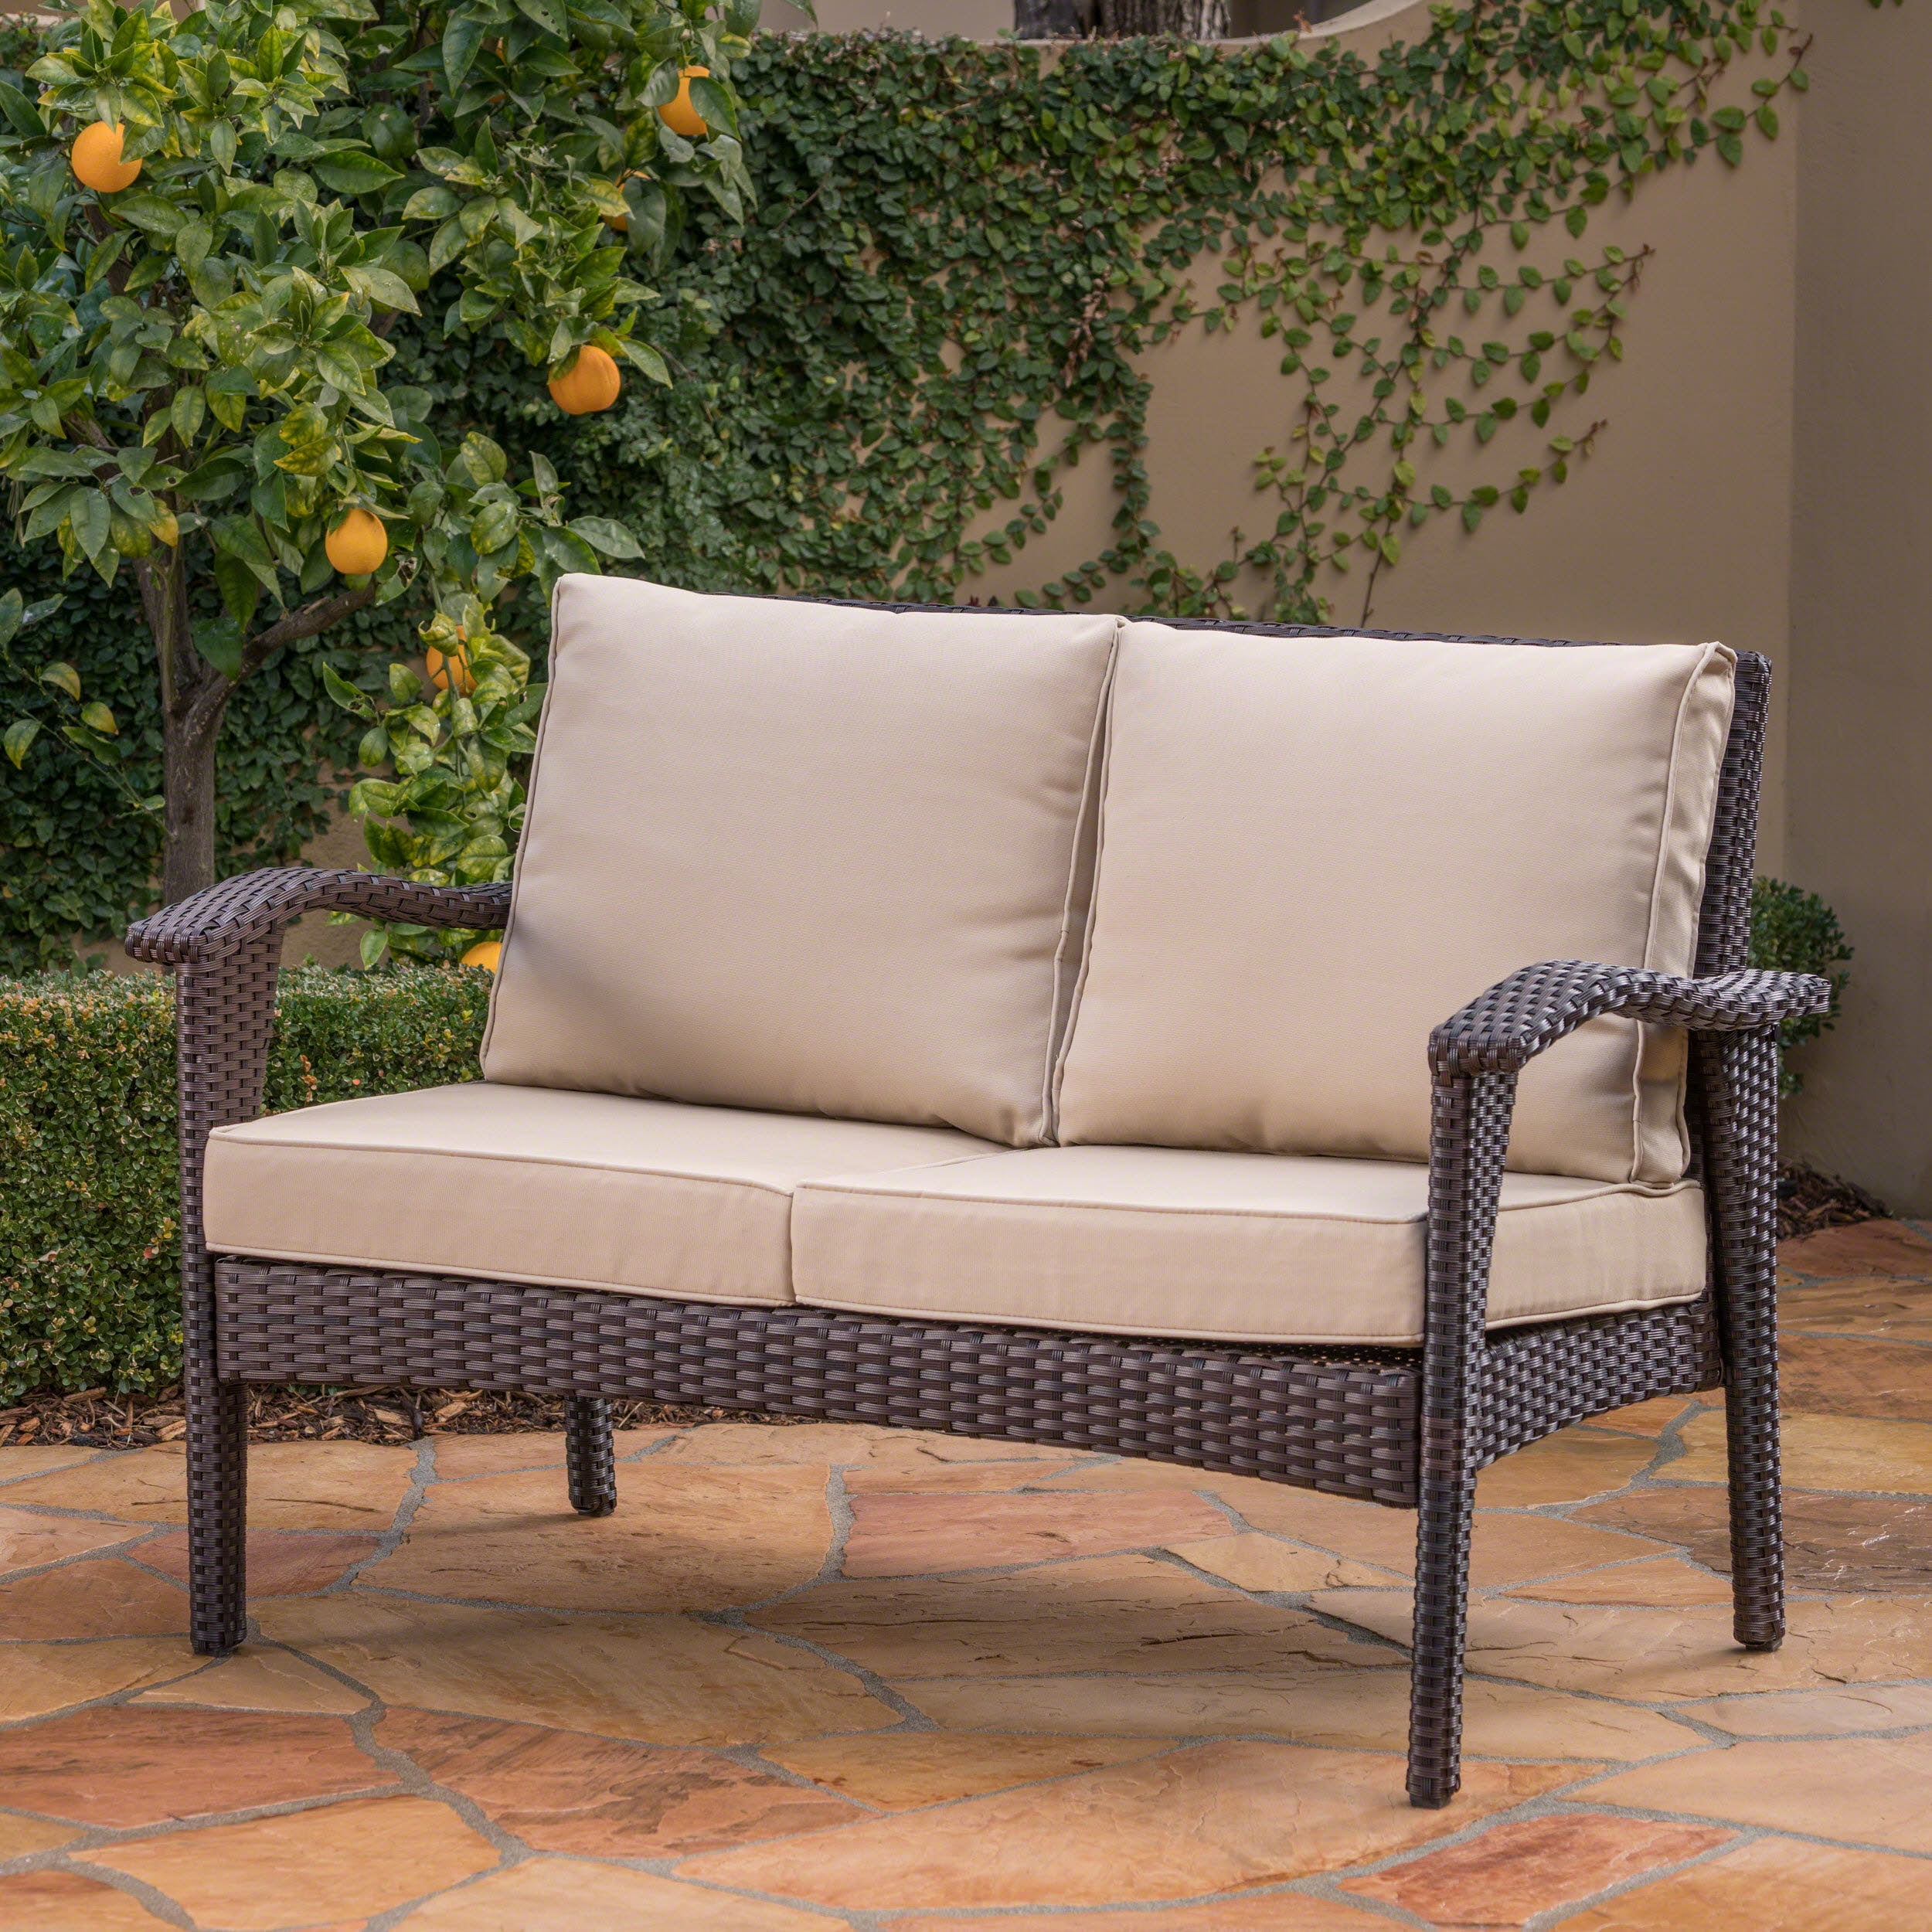 Outdoor Wicker Loveseat with Cushions, Brown,Tan - Walmart.com